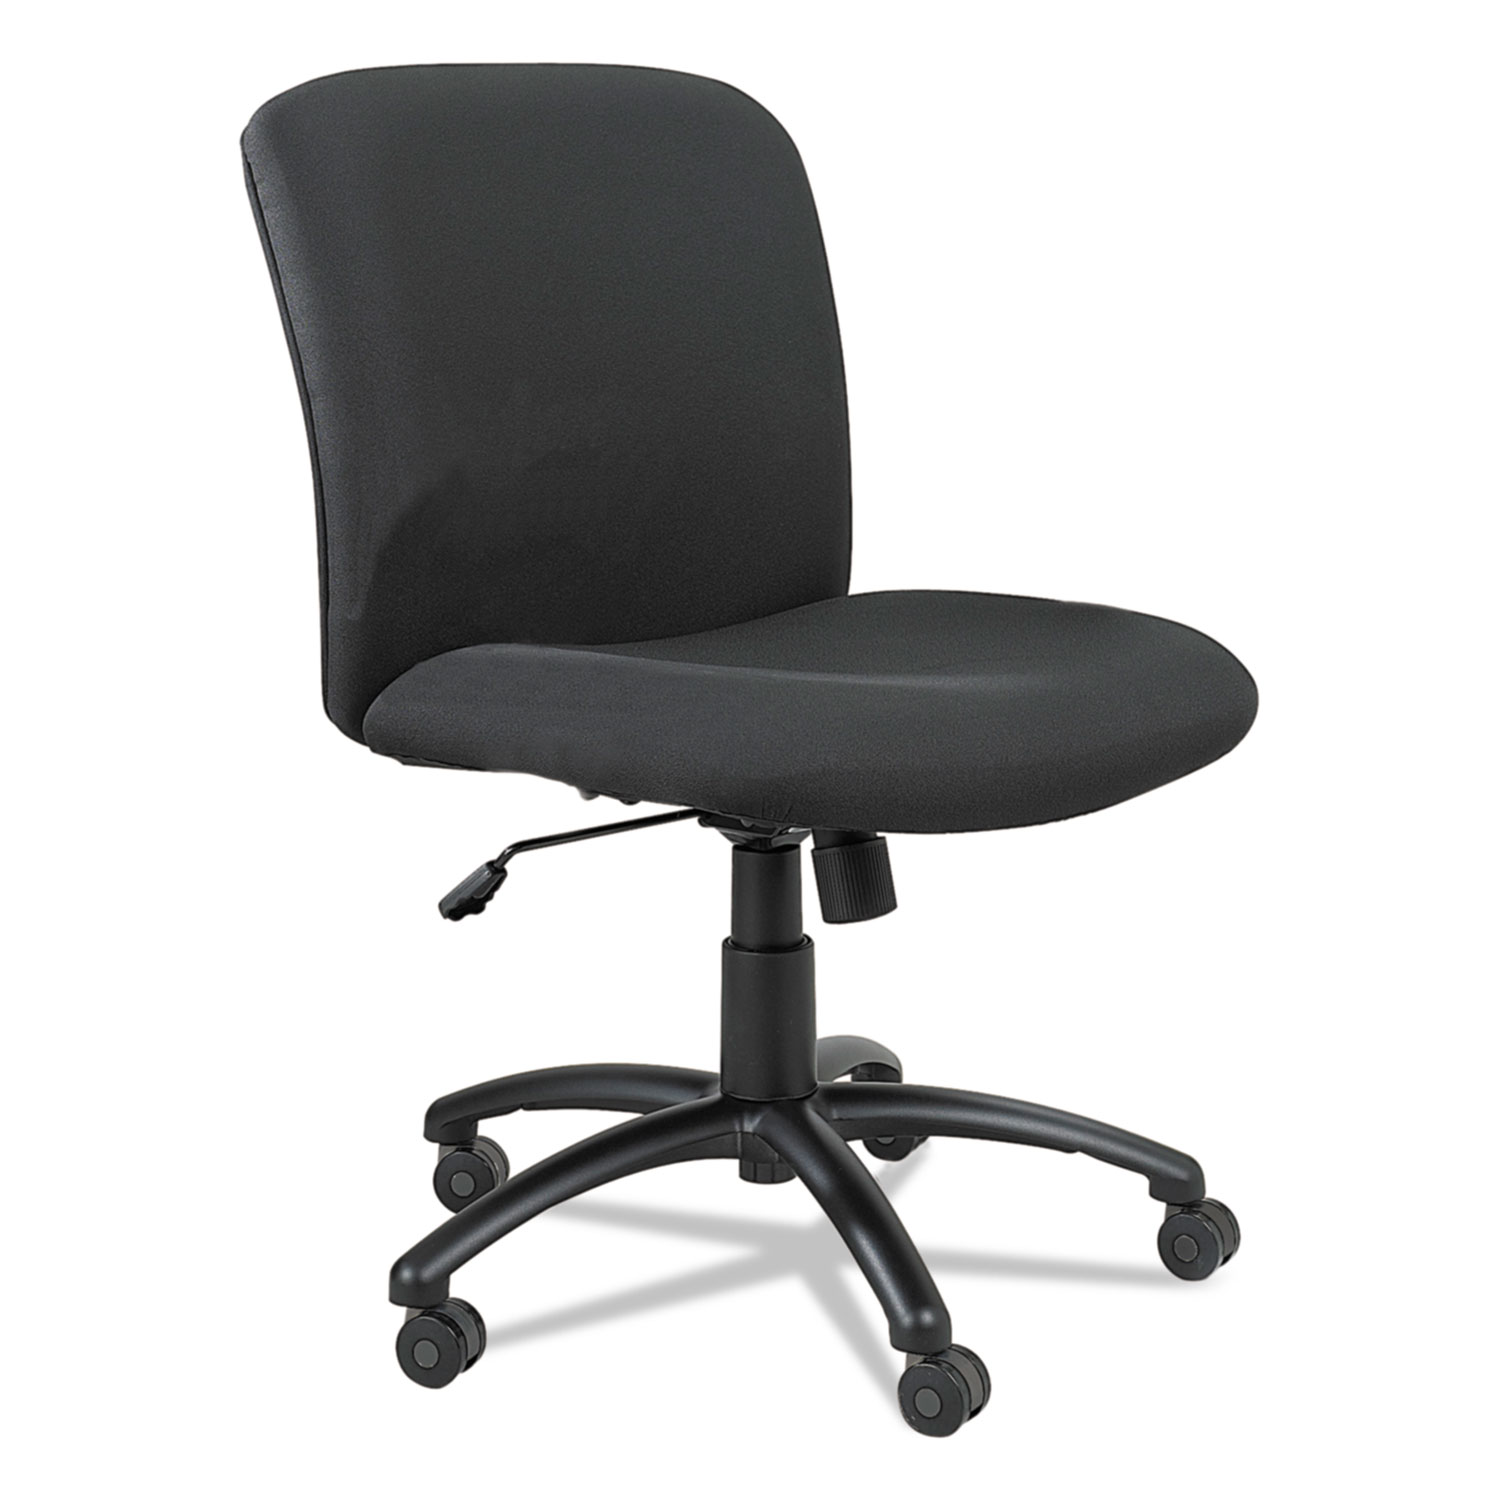  Safco 3491BL Uber Big and Tall Series Mid Back Chair, Supports up to 500 lbs., Black Seat/Black Back, Black Base (SAF3491BL) 